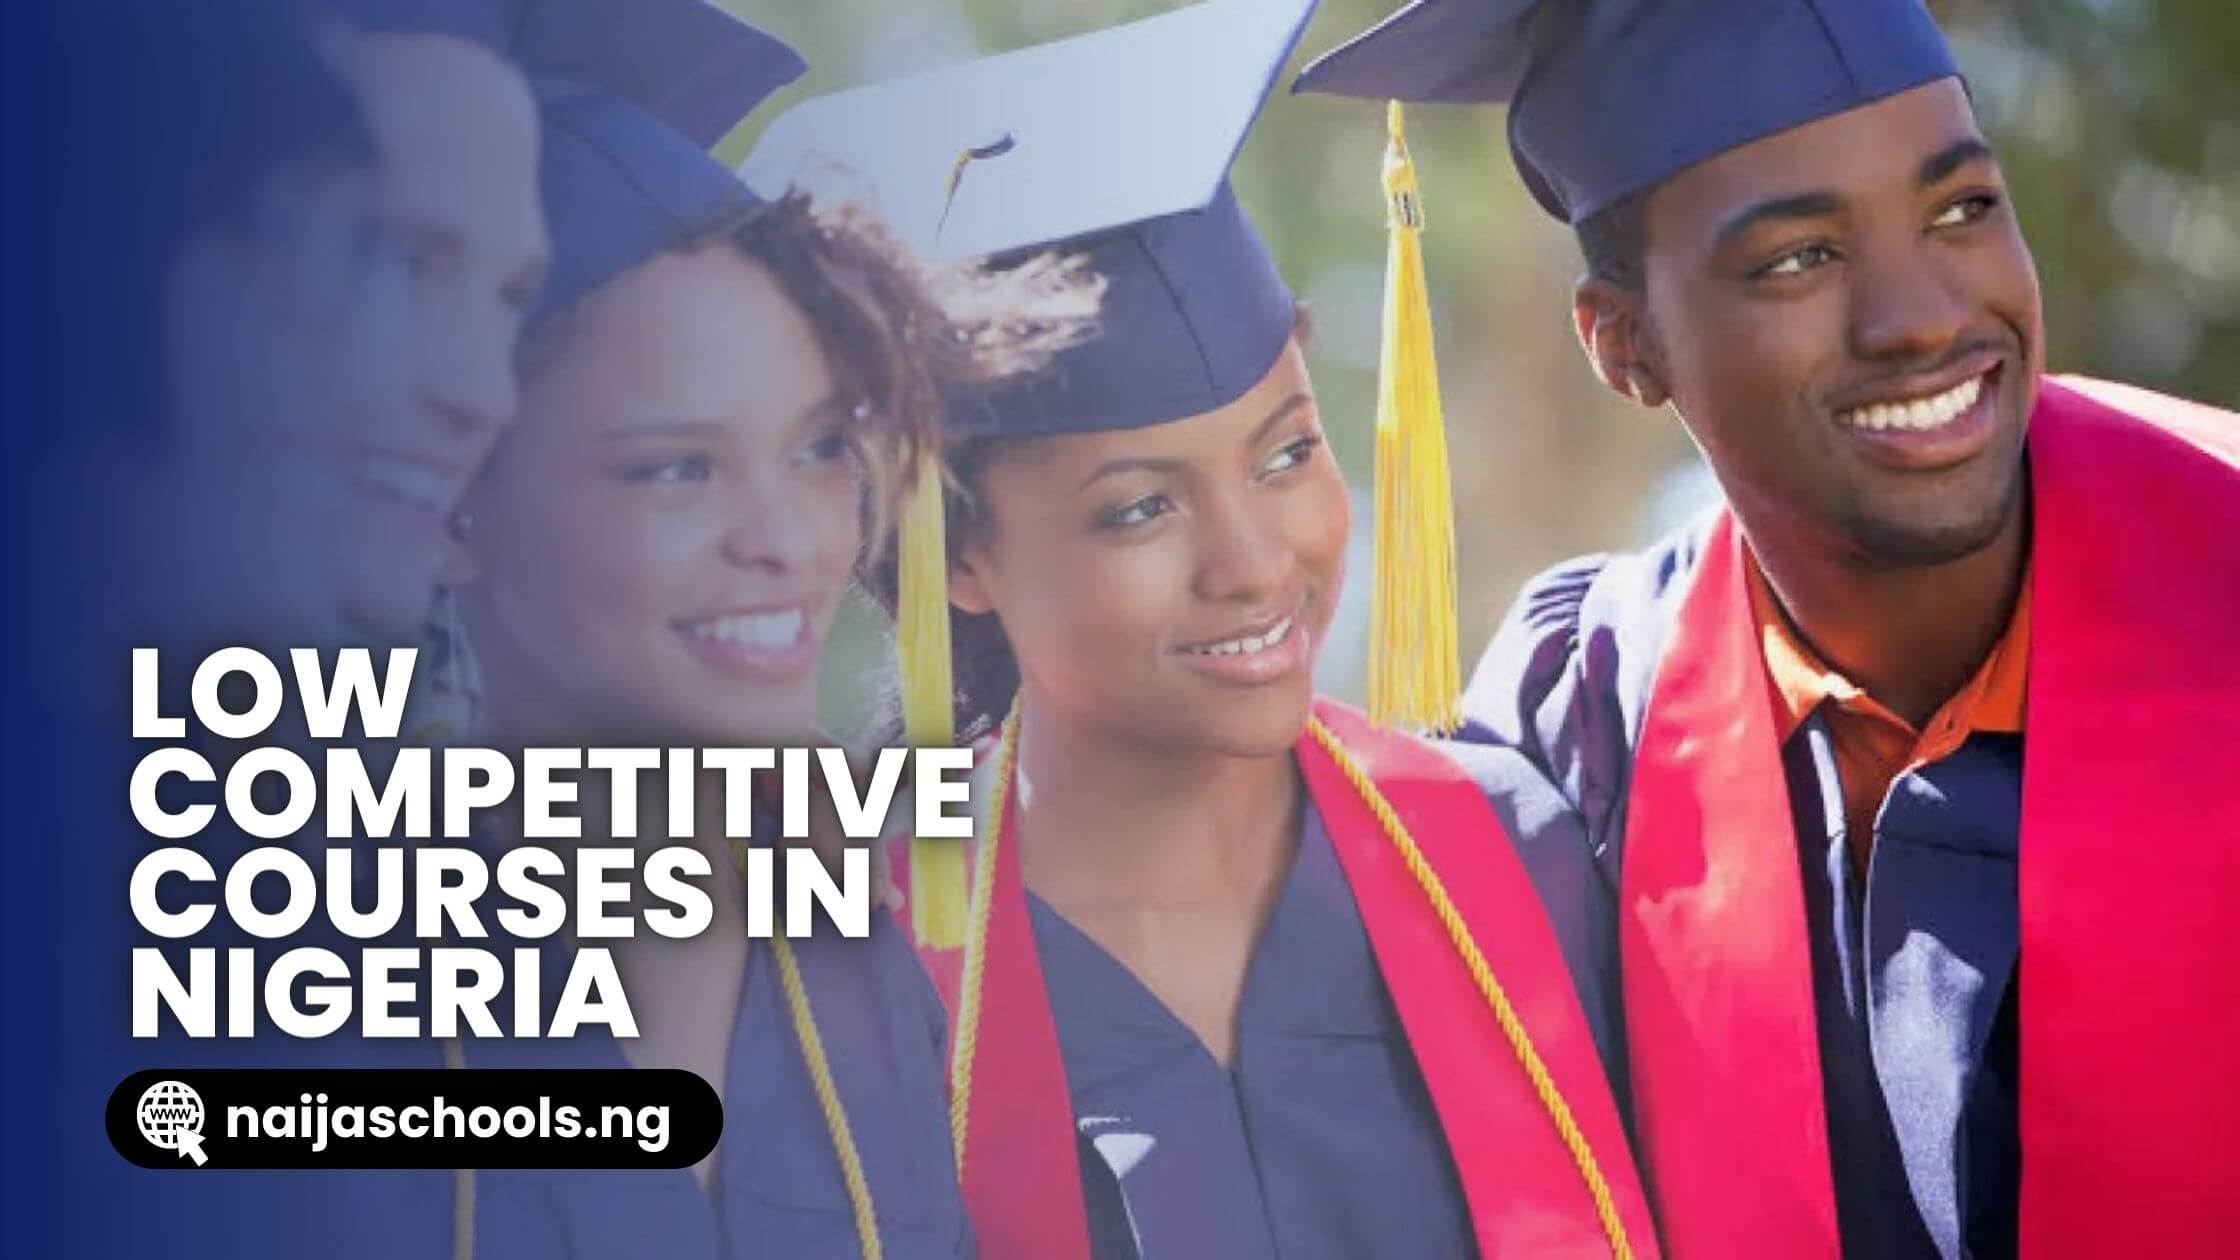 Low Competitive Courses in Nigeria